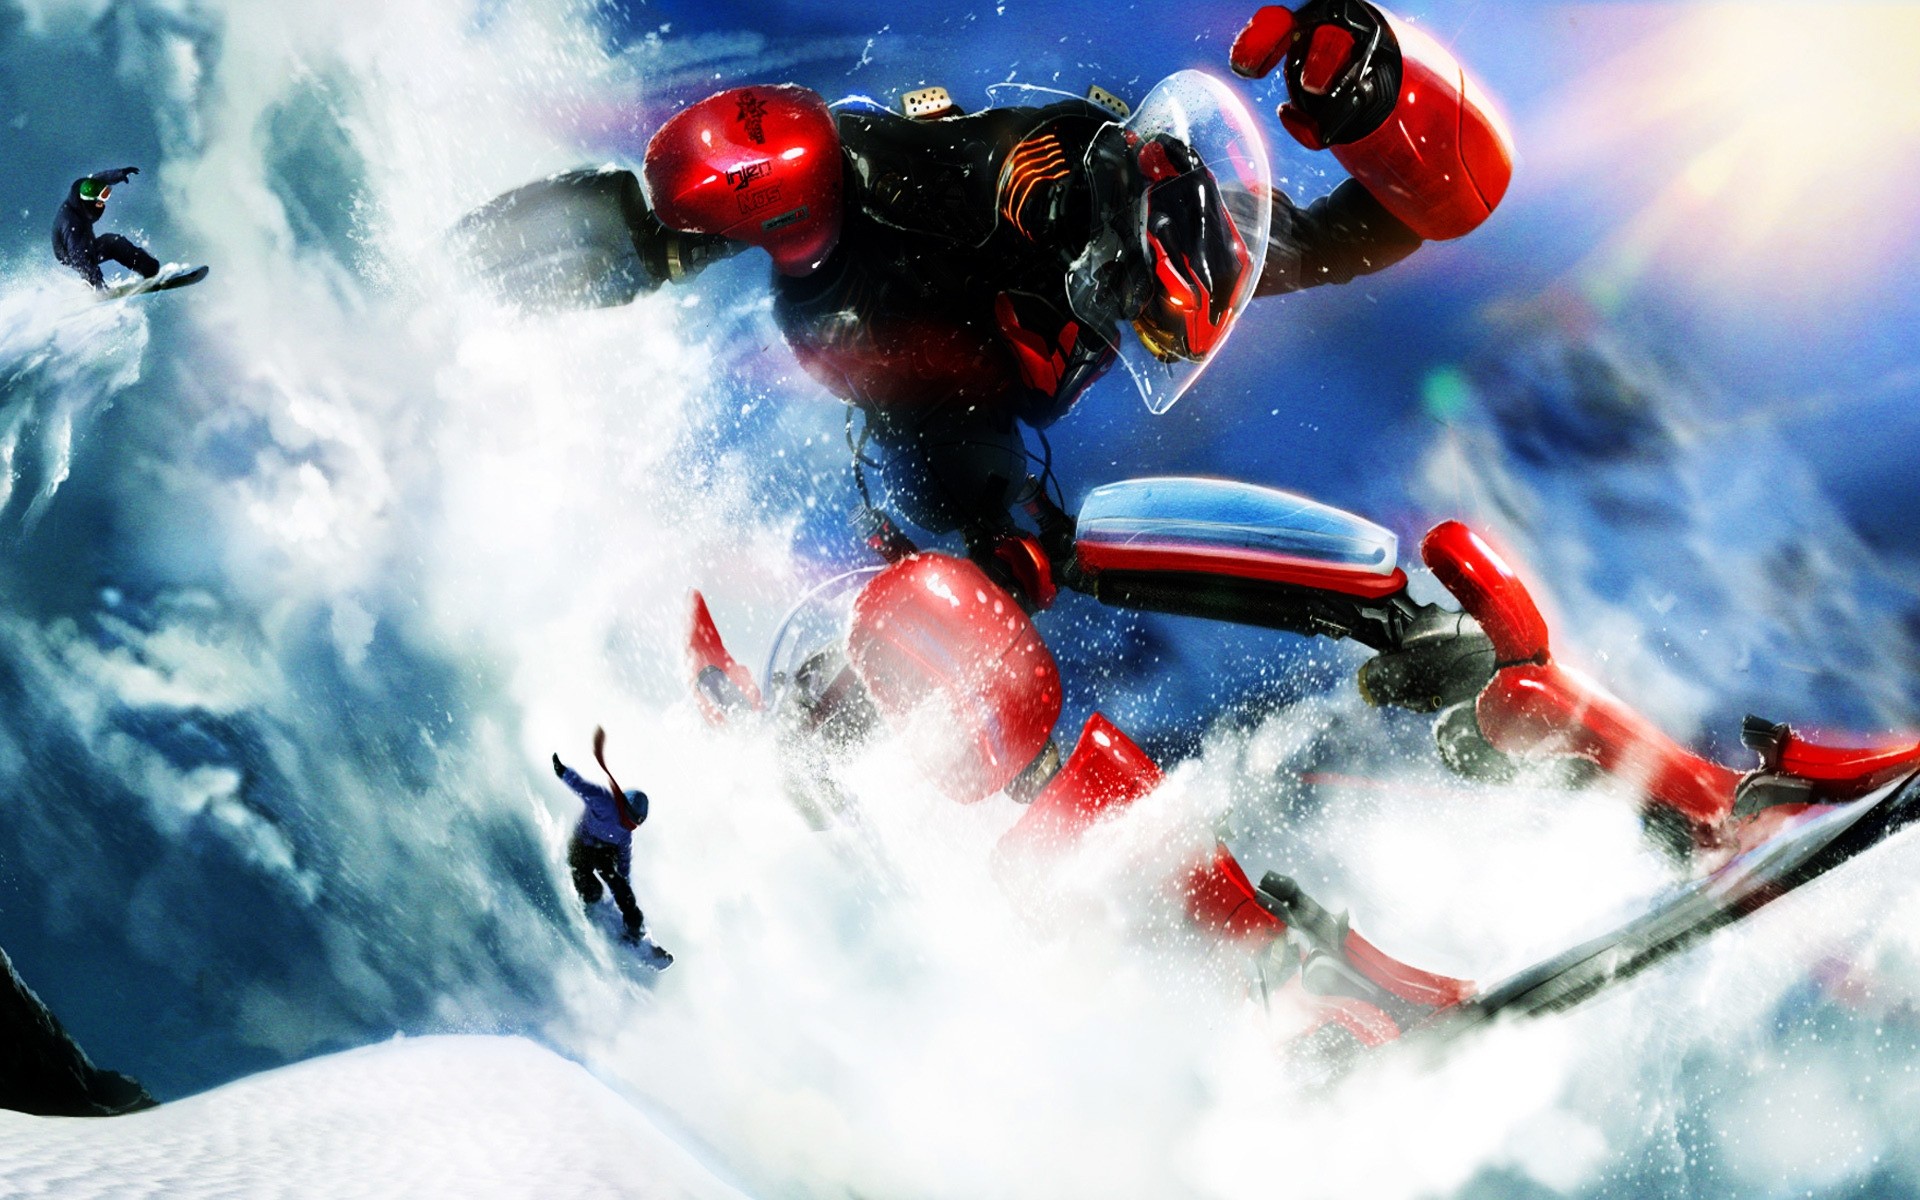 snowboard snow winter action competition christmas fun motion art picture photo manipulated sport